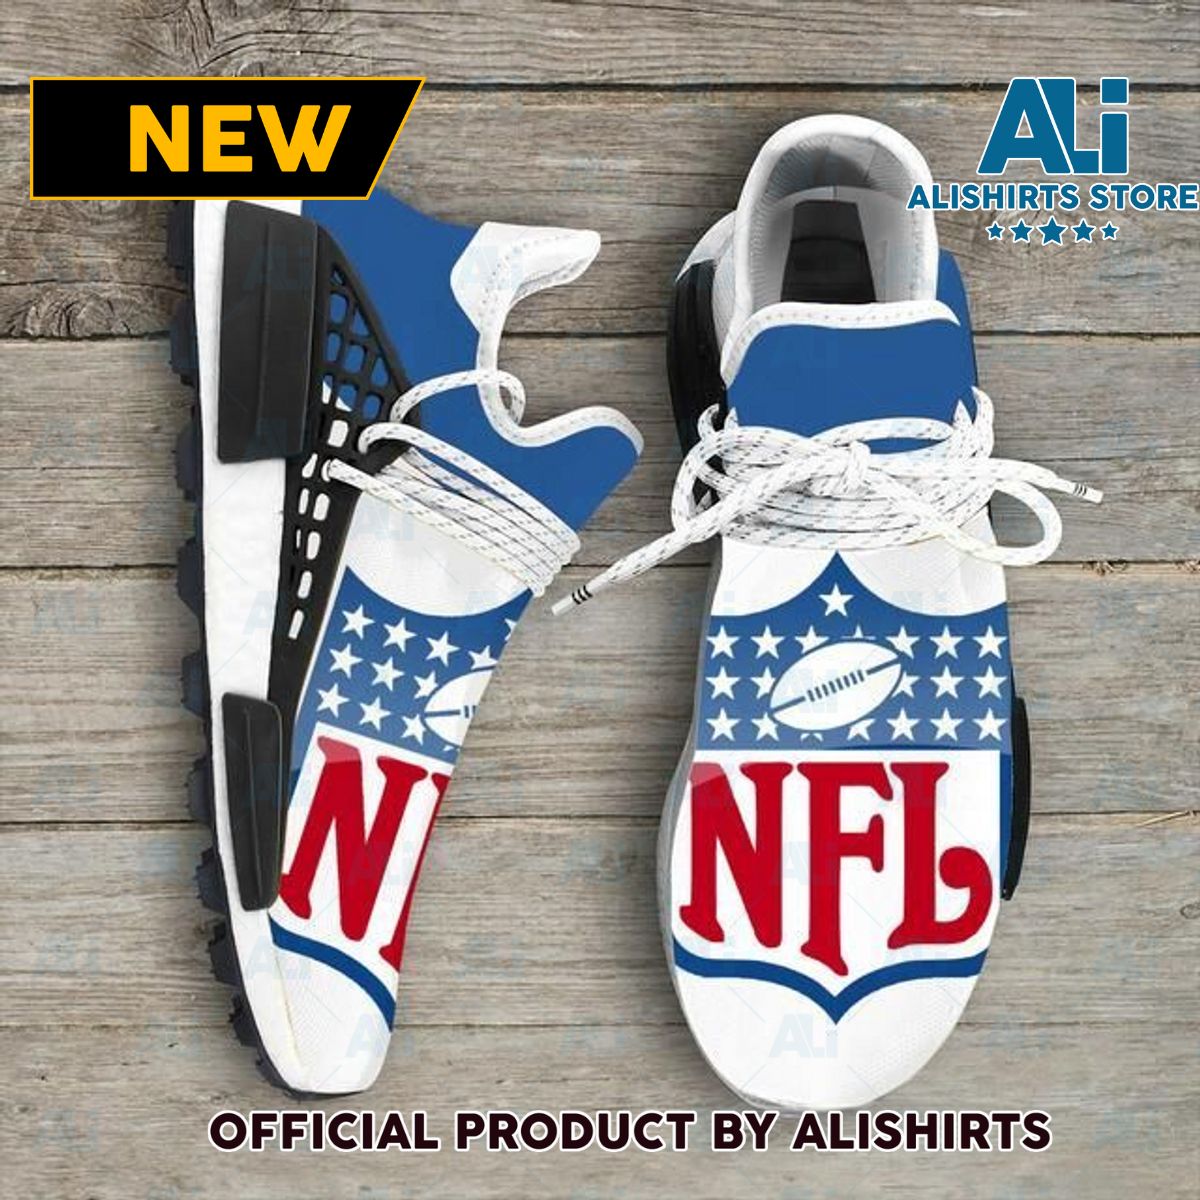 National Football League Players Association Nfl NMD Human Race shoes Adidas NMD Sneakers